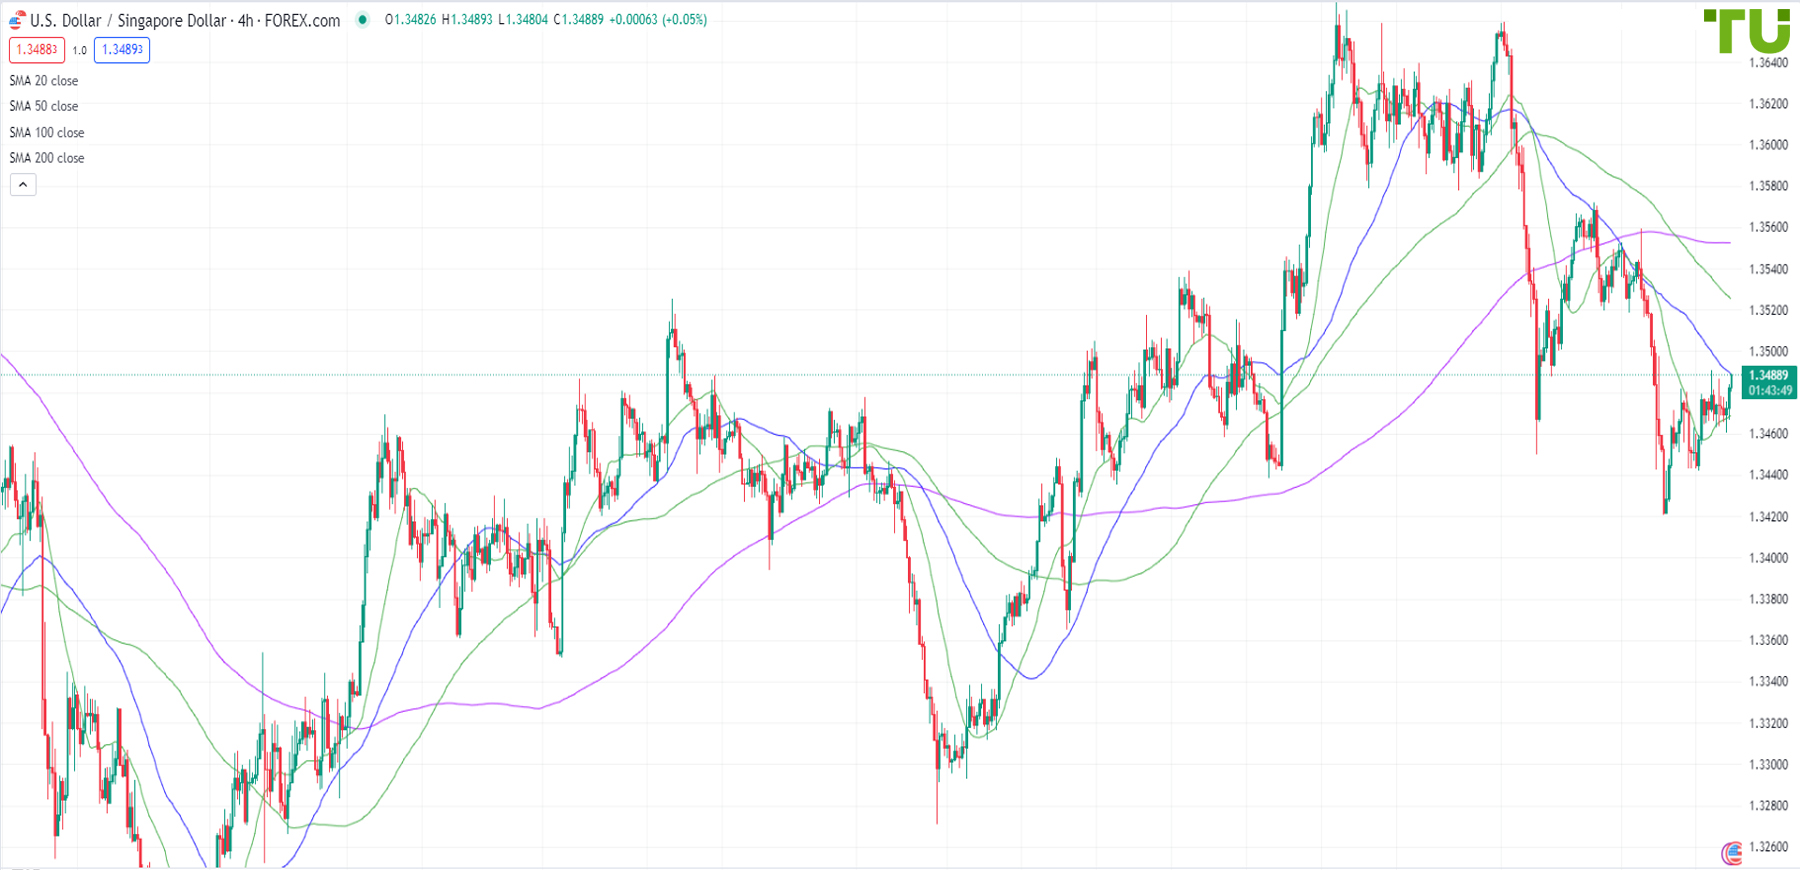 USD/SGD attempts to continue recovery